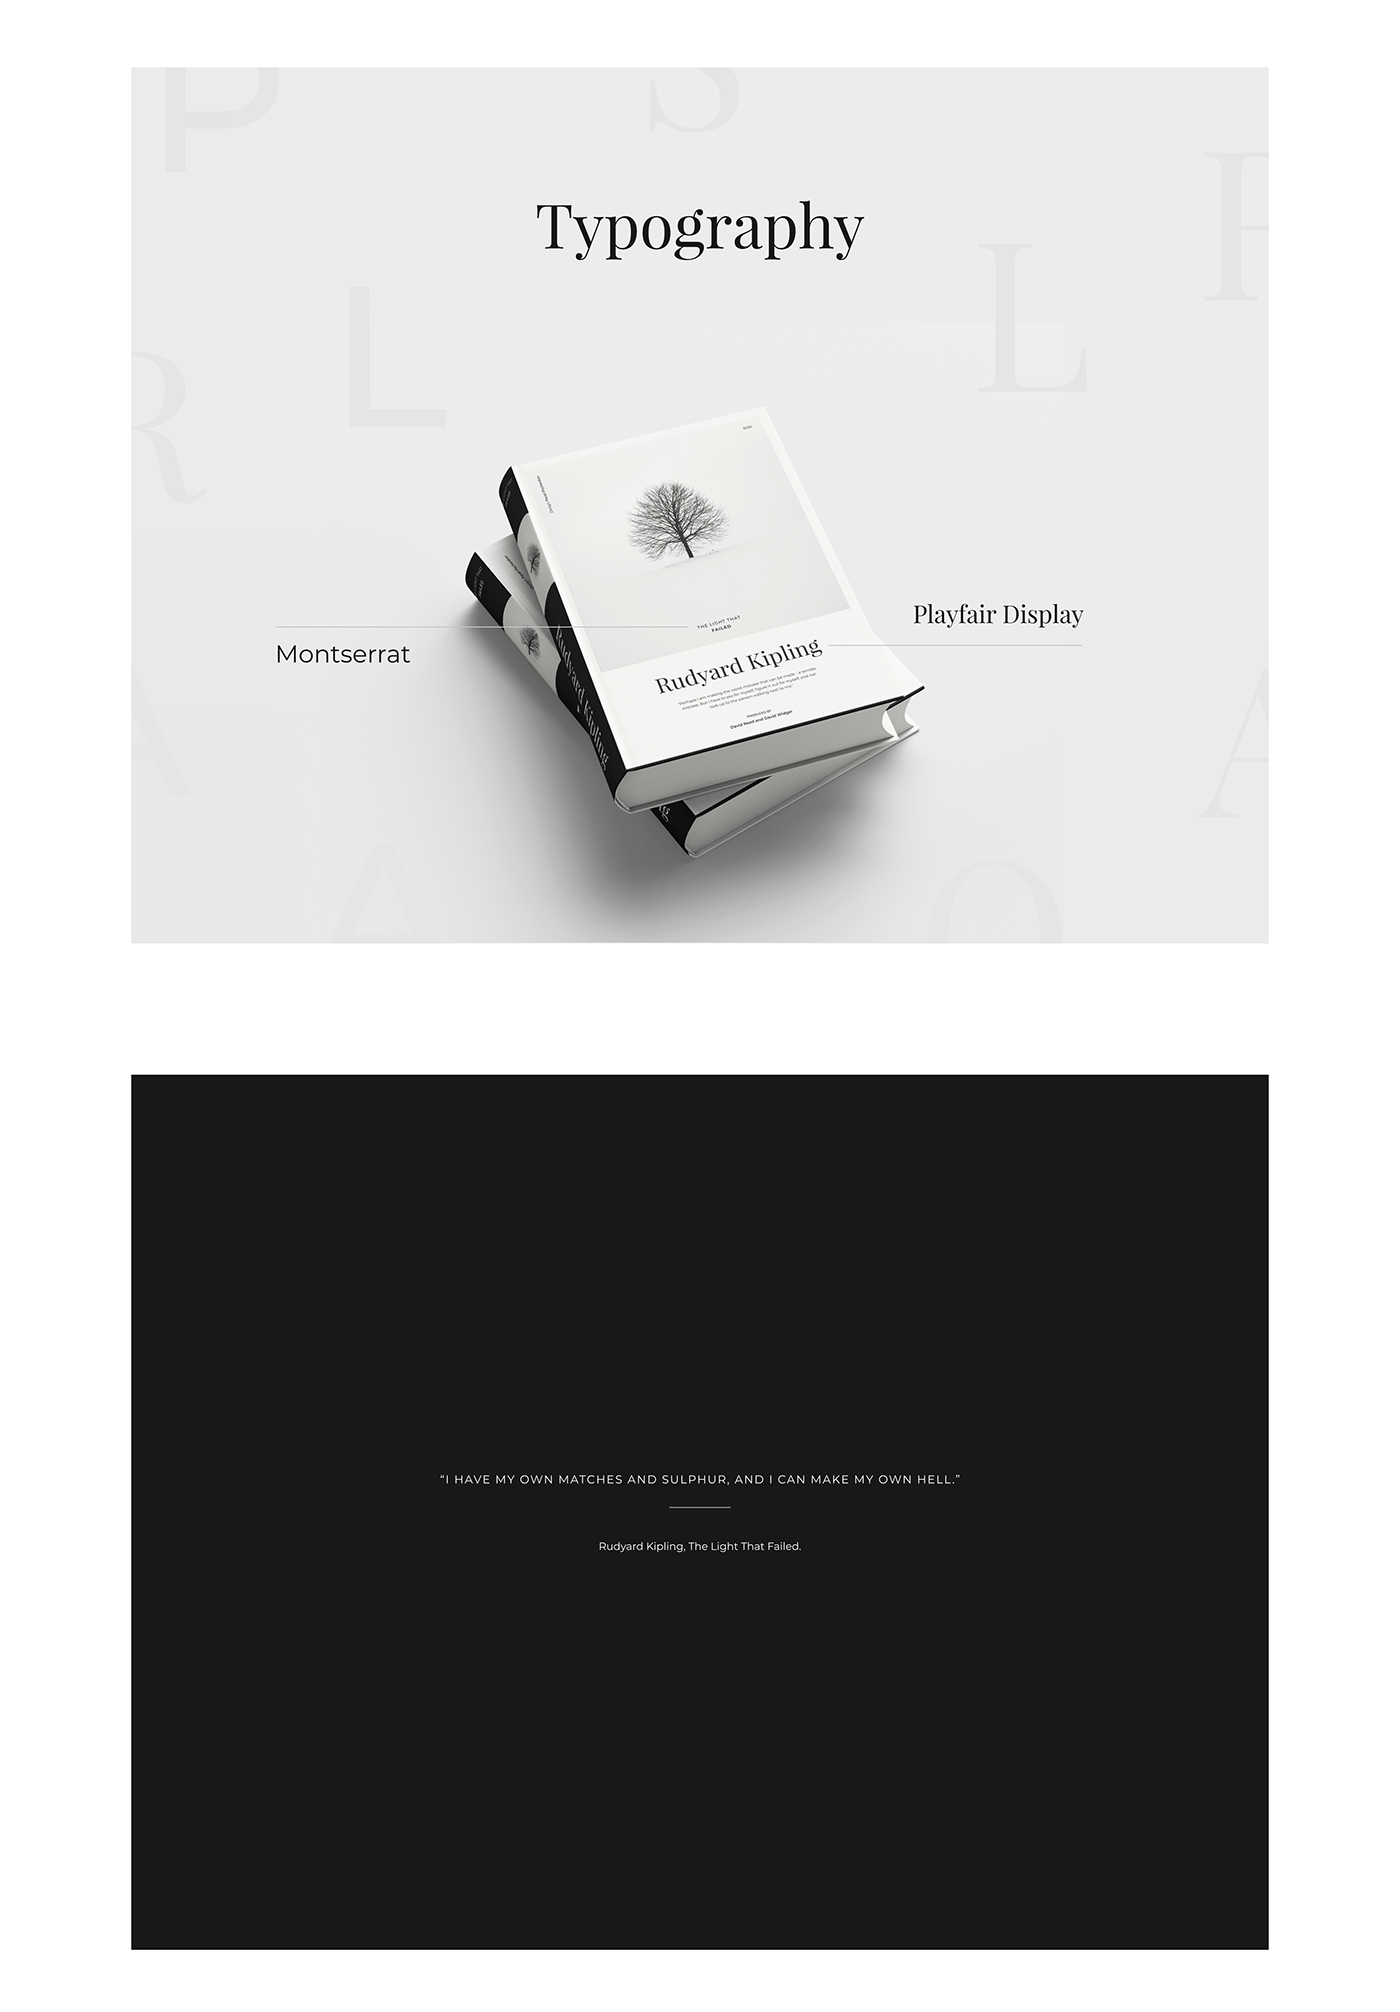 black book culture edition editorial design  publishing   story Style typography   White